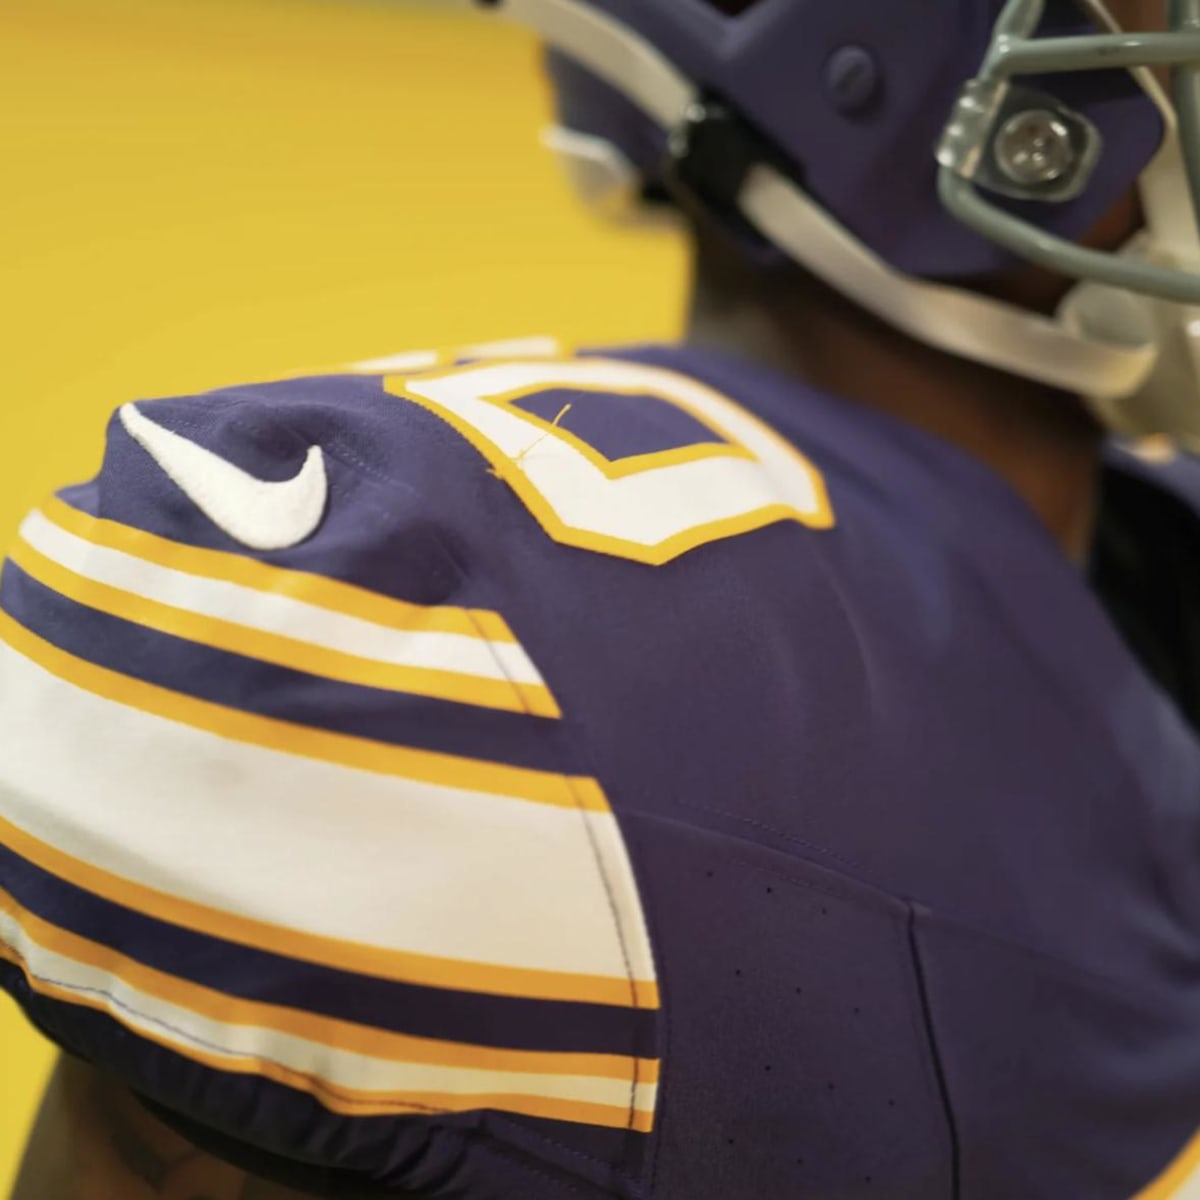 COLOR RUSH UNIFORMS ARE BACK‼️ The #Vikings will wear their Color